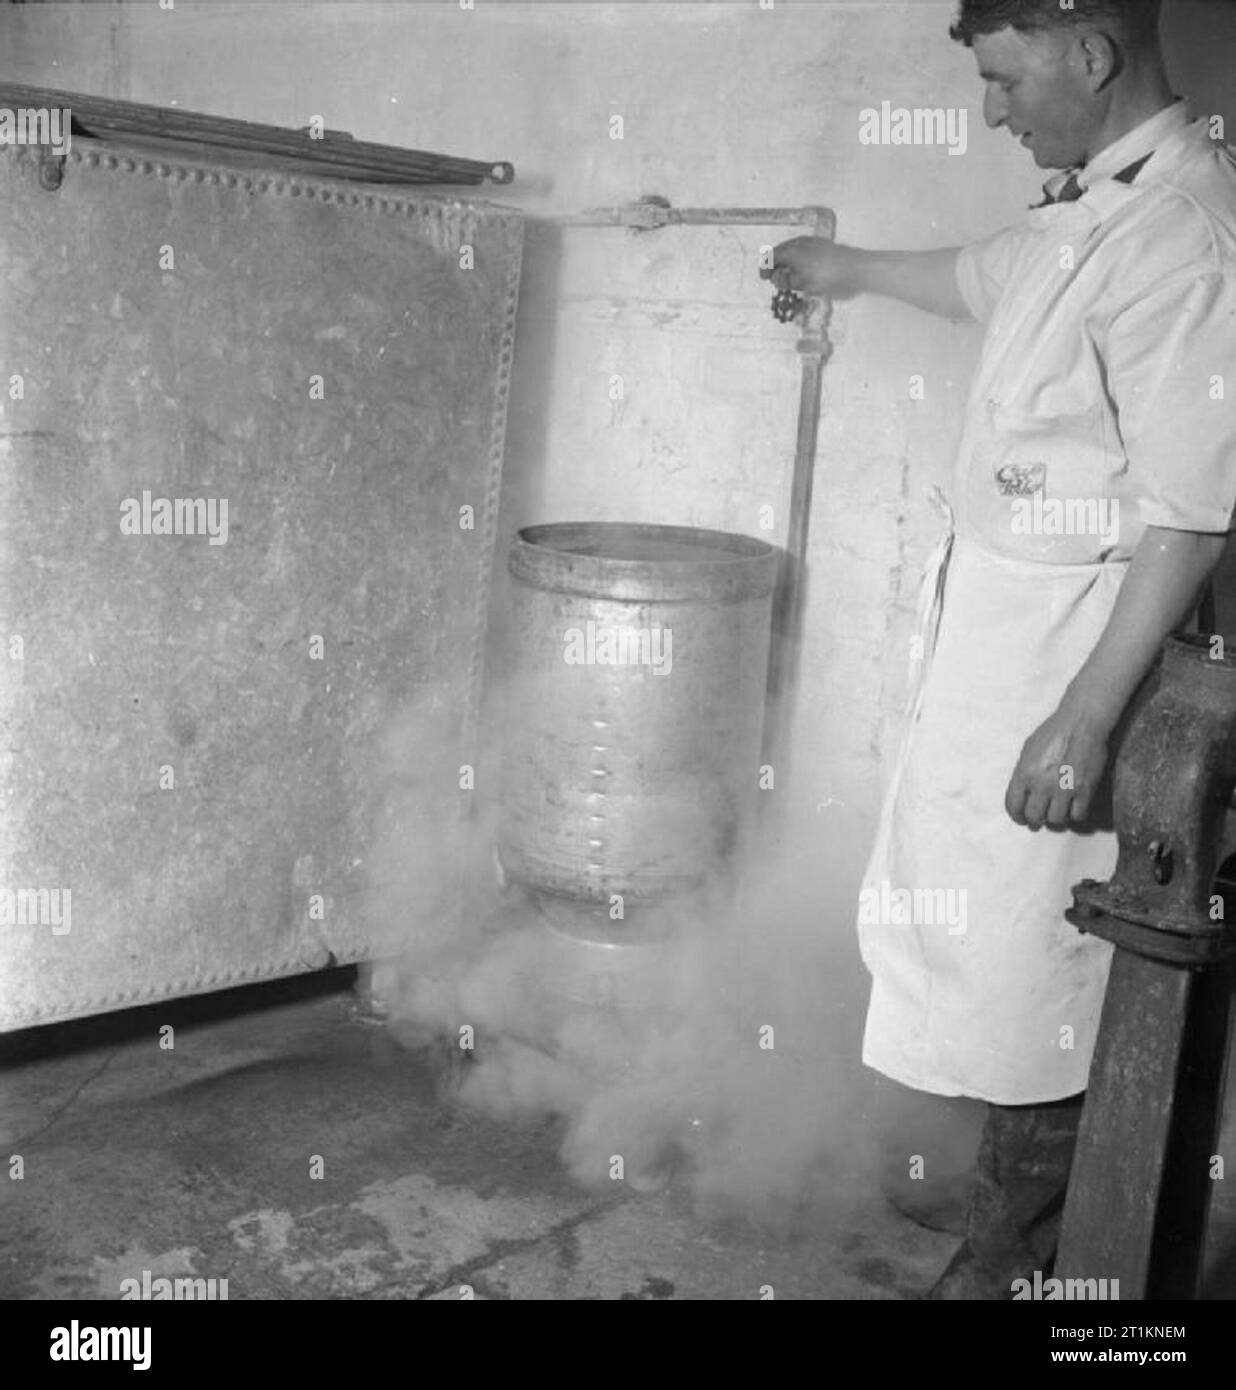 Milk Production- Dairy Farming in Wartime, Norfolk, England, UK, 1944 Milk churns are sterilised by steam at a dairy farm, somewhere in Norfolk. The original caption states that 'unless this precaution is taken milk may be contaminated by placing it in unsterile churns, thus nullifying the good effects of careful and clean methods of production'. Stock Photo